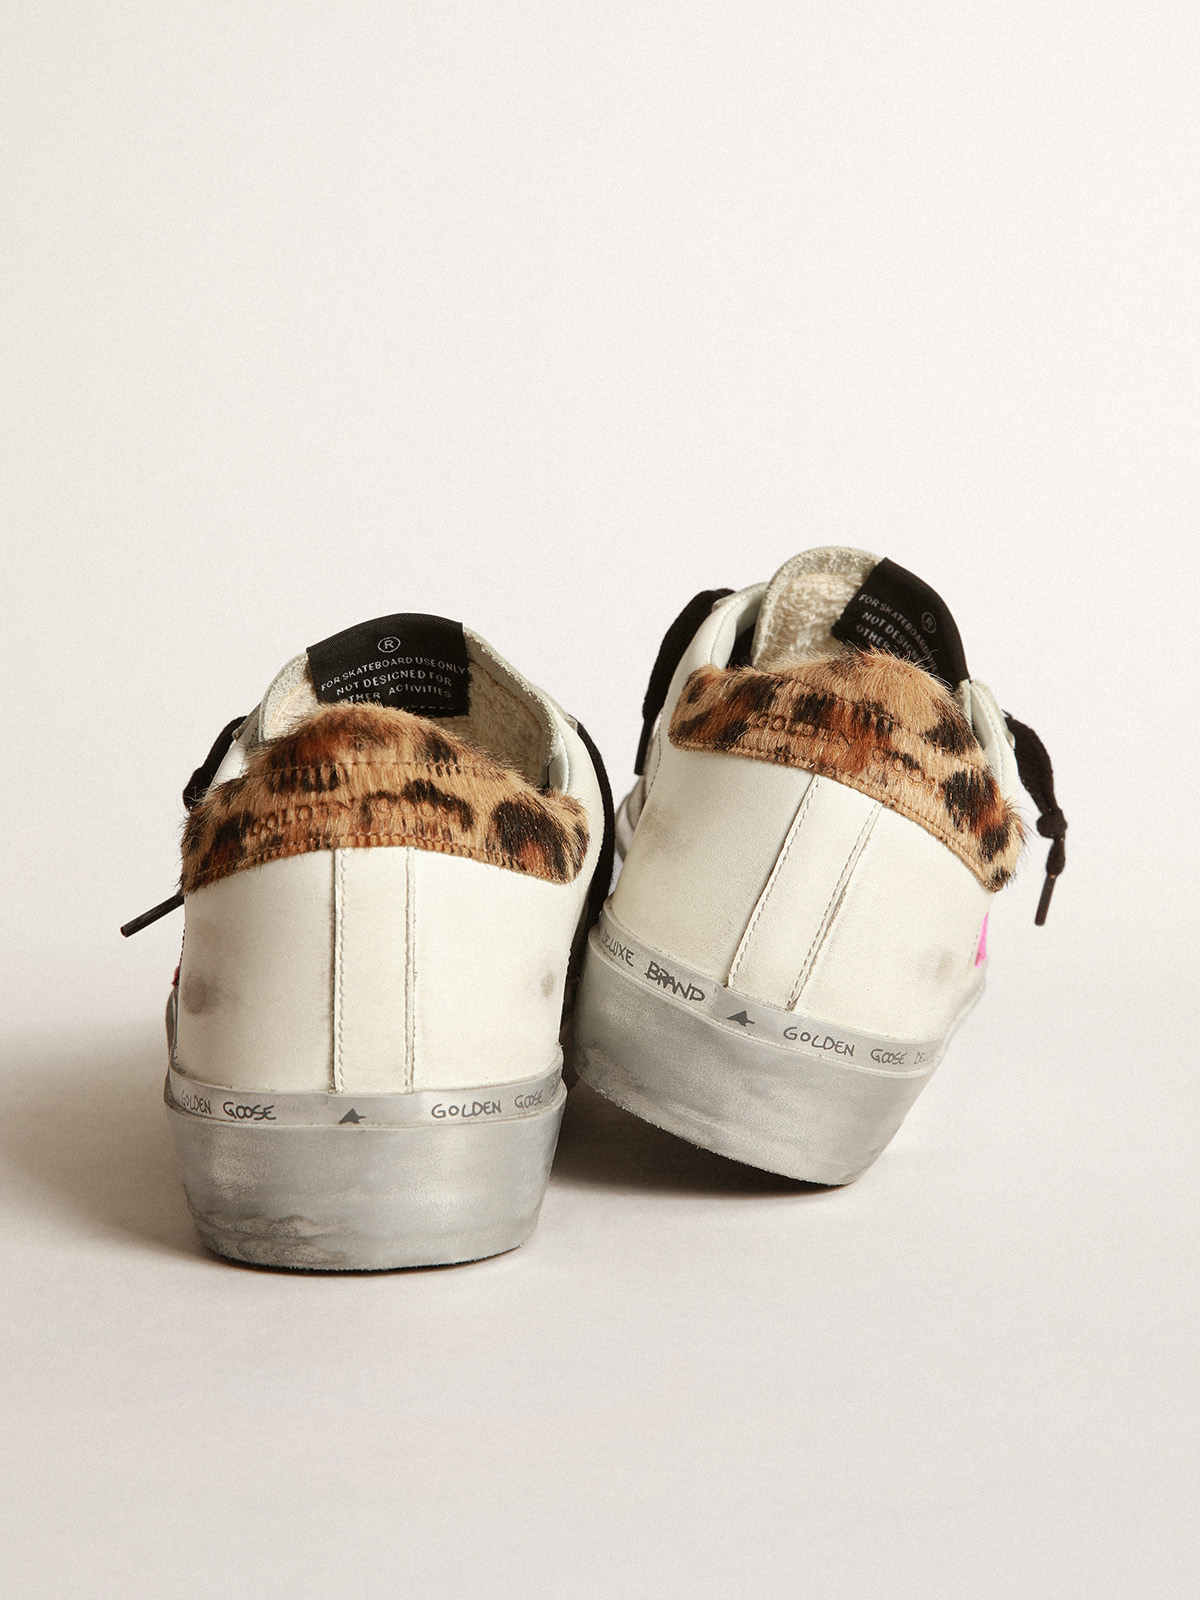 Hi Star sneakers with fuchsia star and leopard-print heel tab | Golden Goose